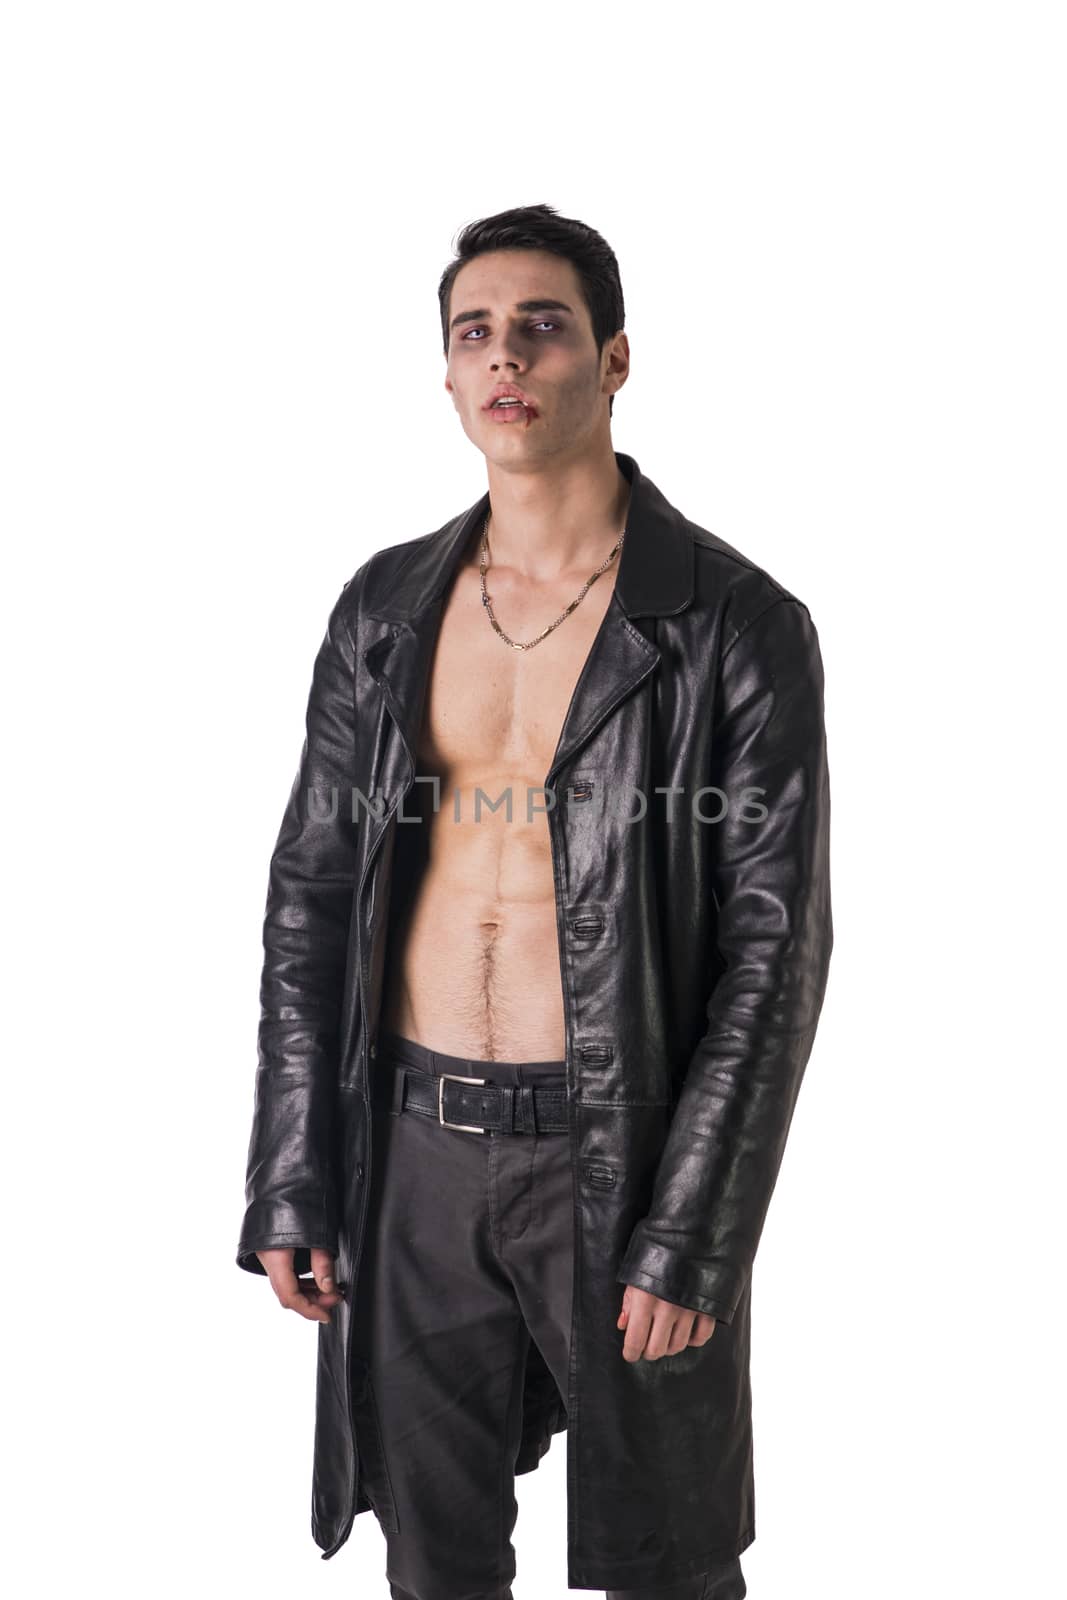 Young Vampire Man in an Open Black Leather Jacket, Showing his Chest and Abs by artofphoto